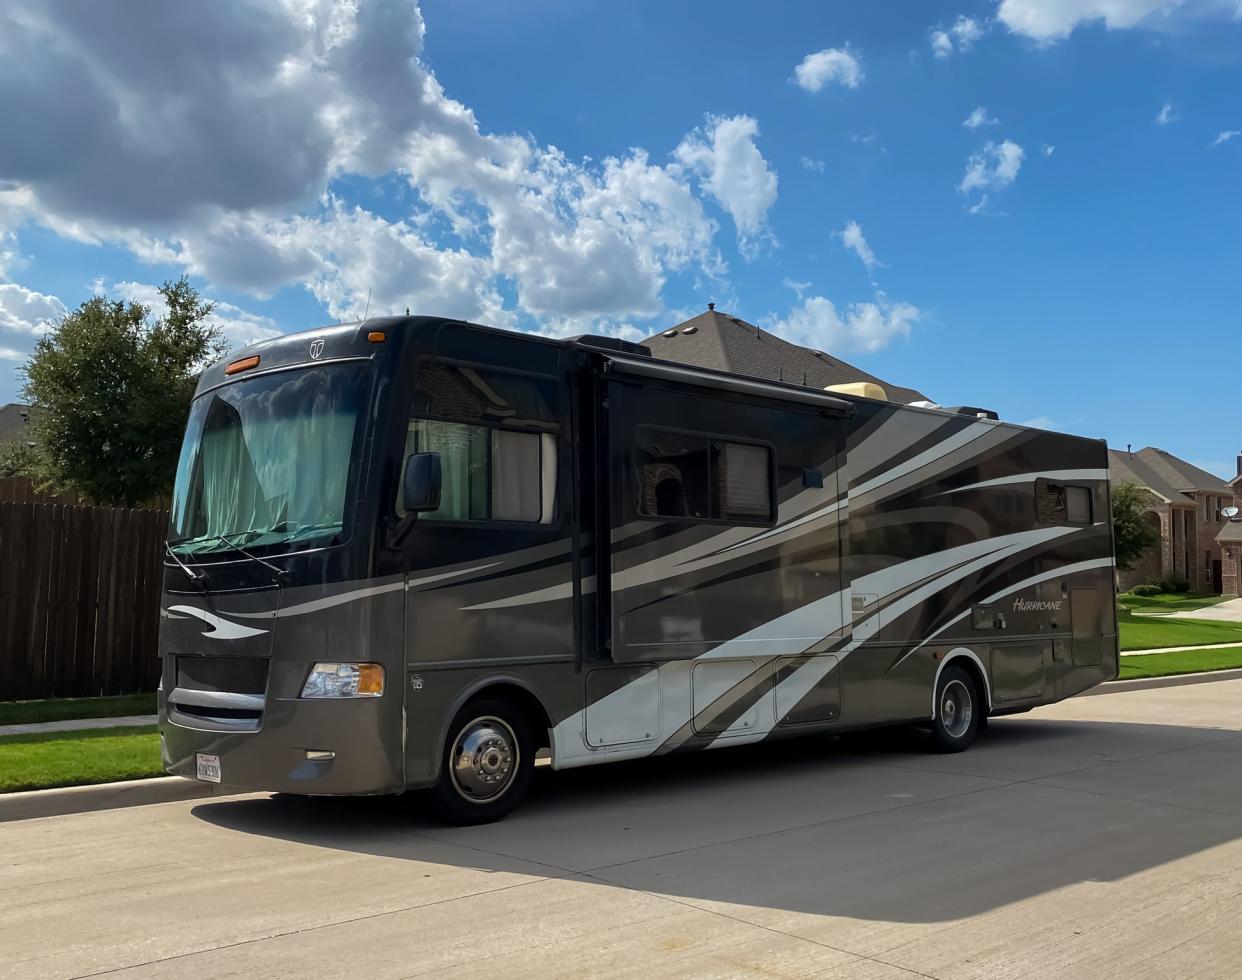 Mckinney, TX / USA - August 10, 2020: front view of hurricane motorhome recreational vehicle (RV) with blue sky in the afternoon